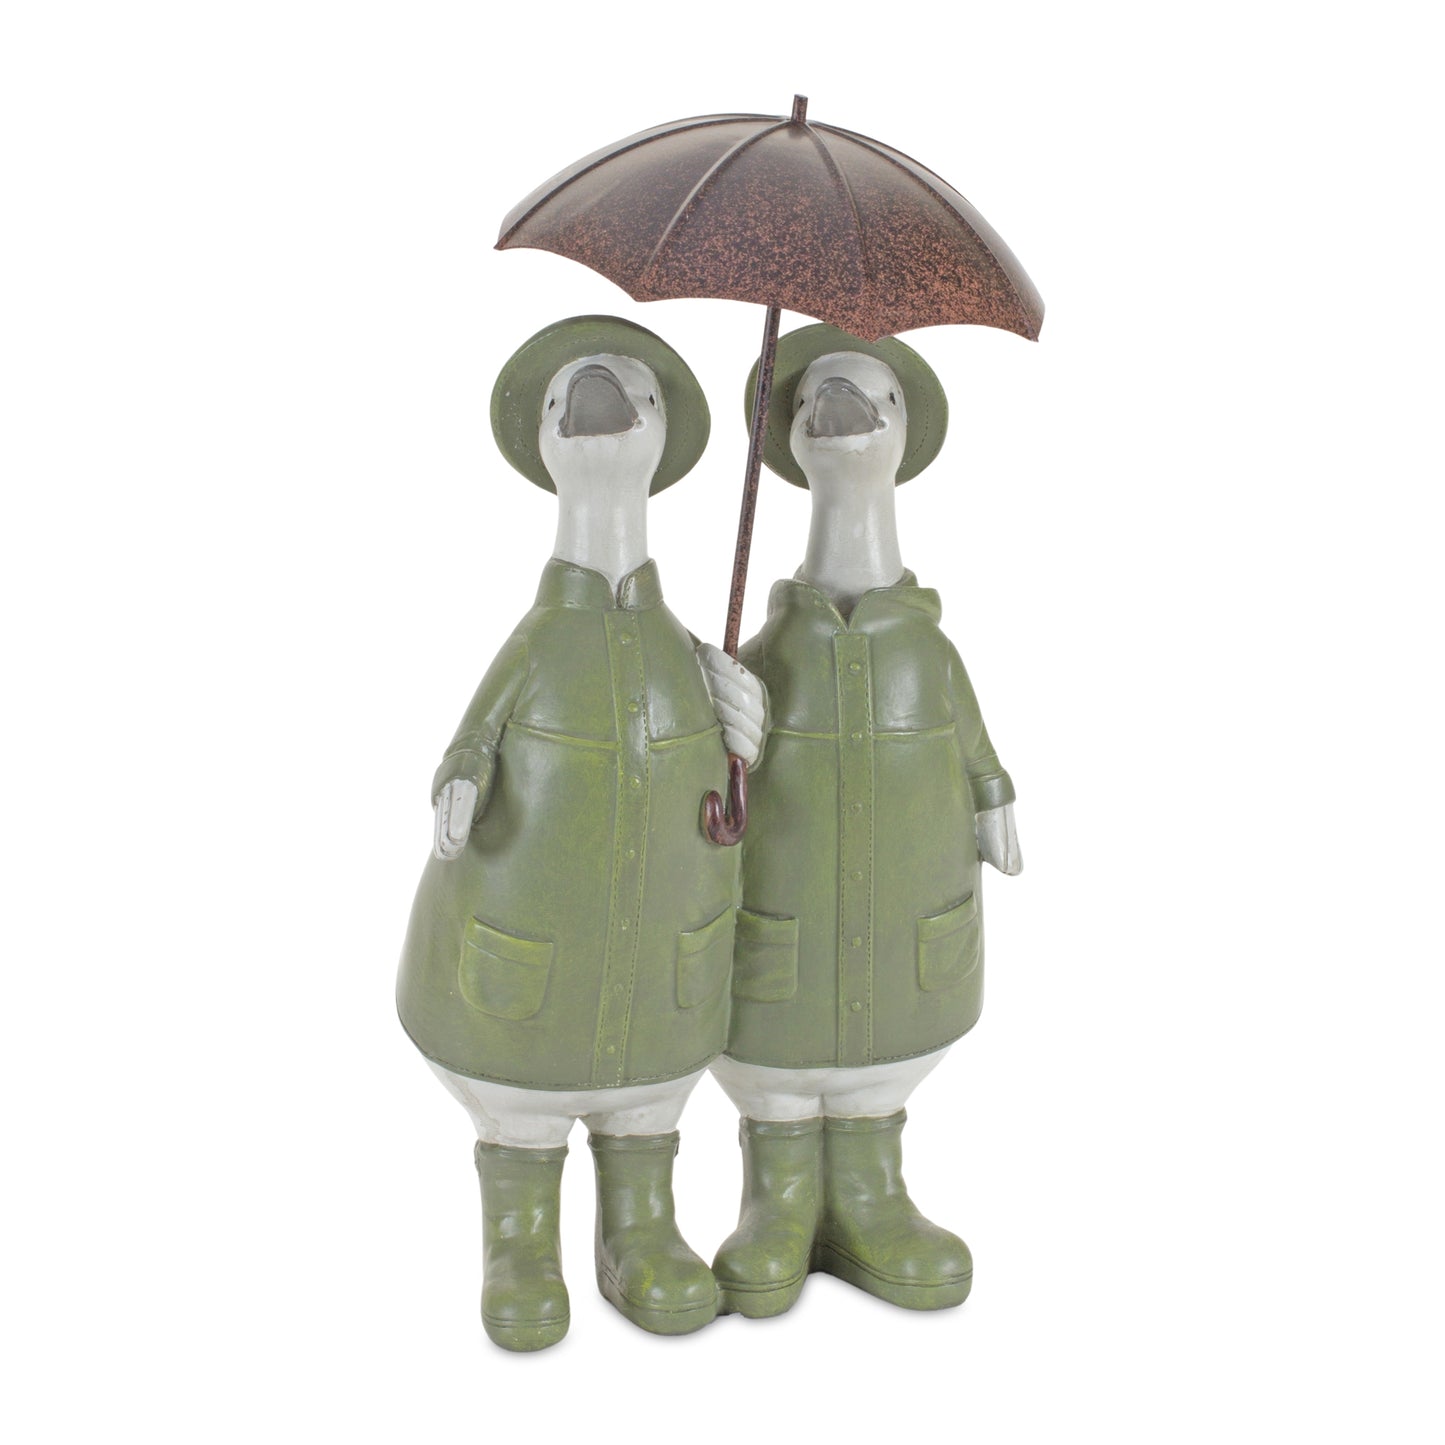 Stone Garden Duck with Raincoat and Umbrella Accent 13.5"H